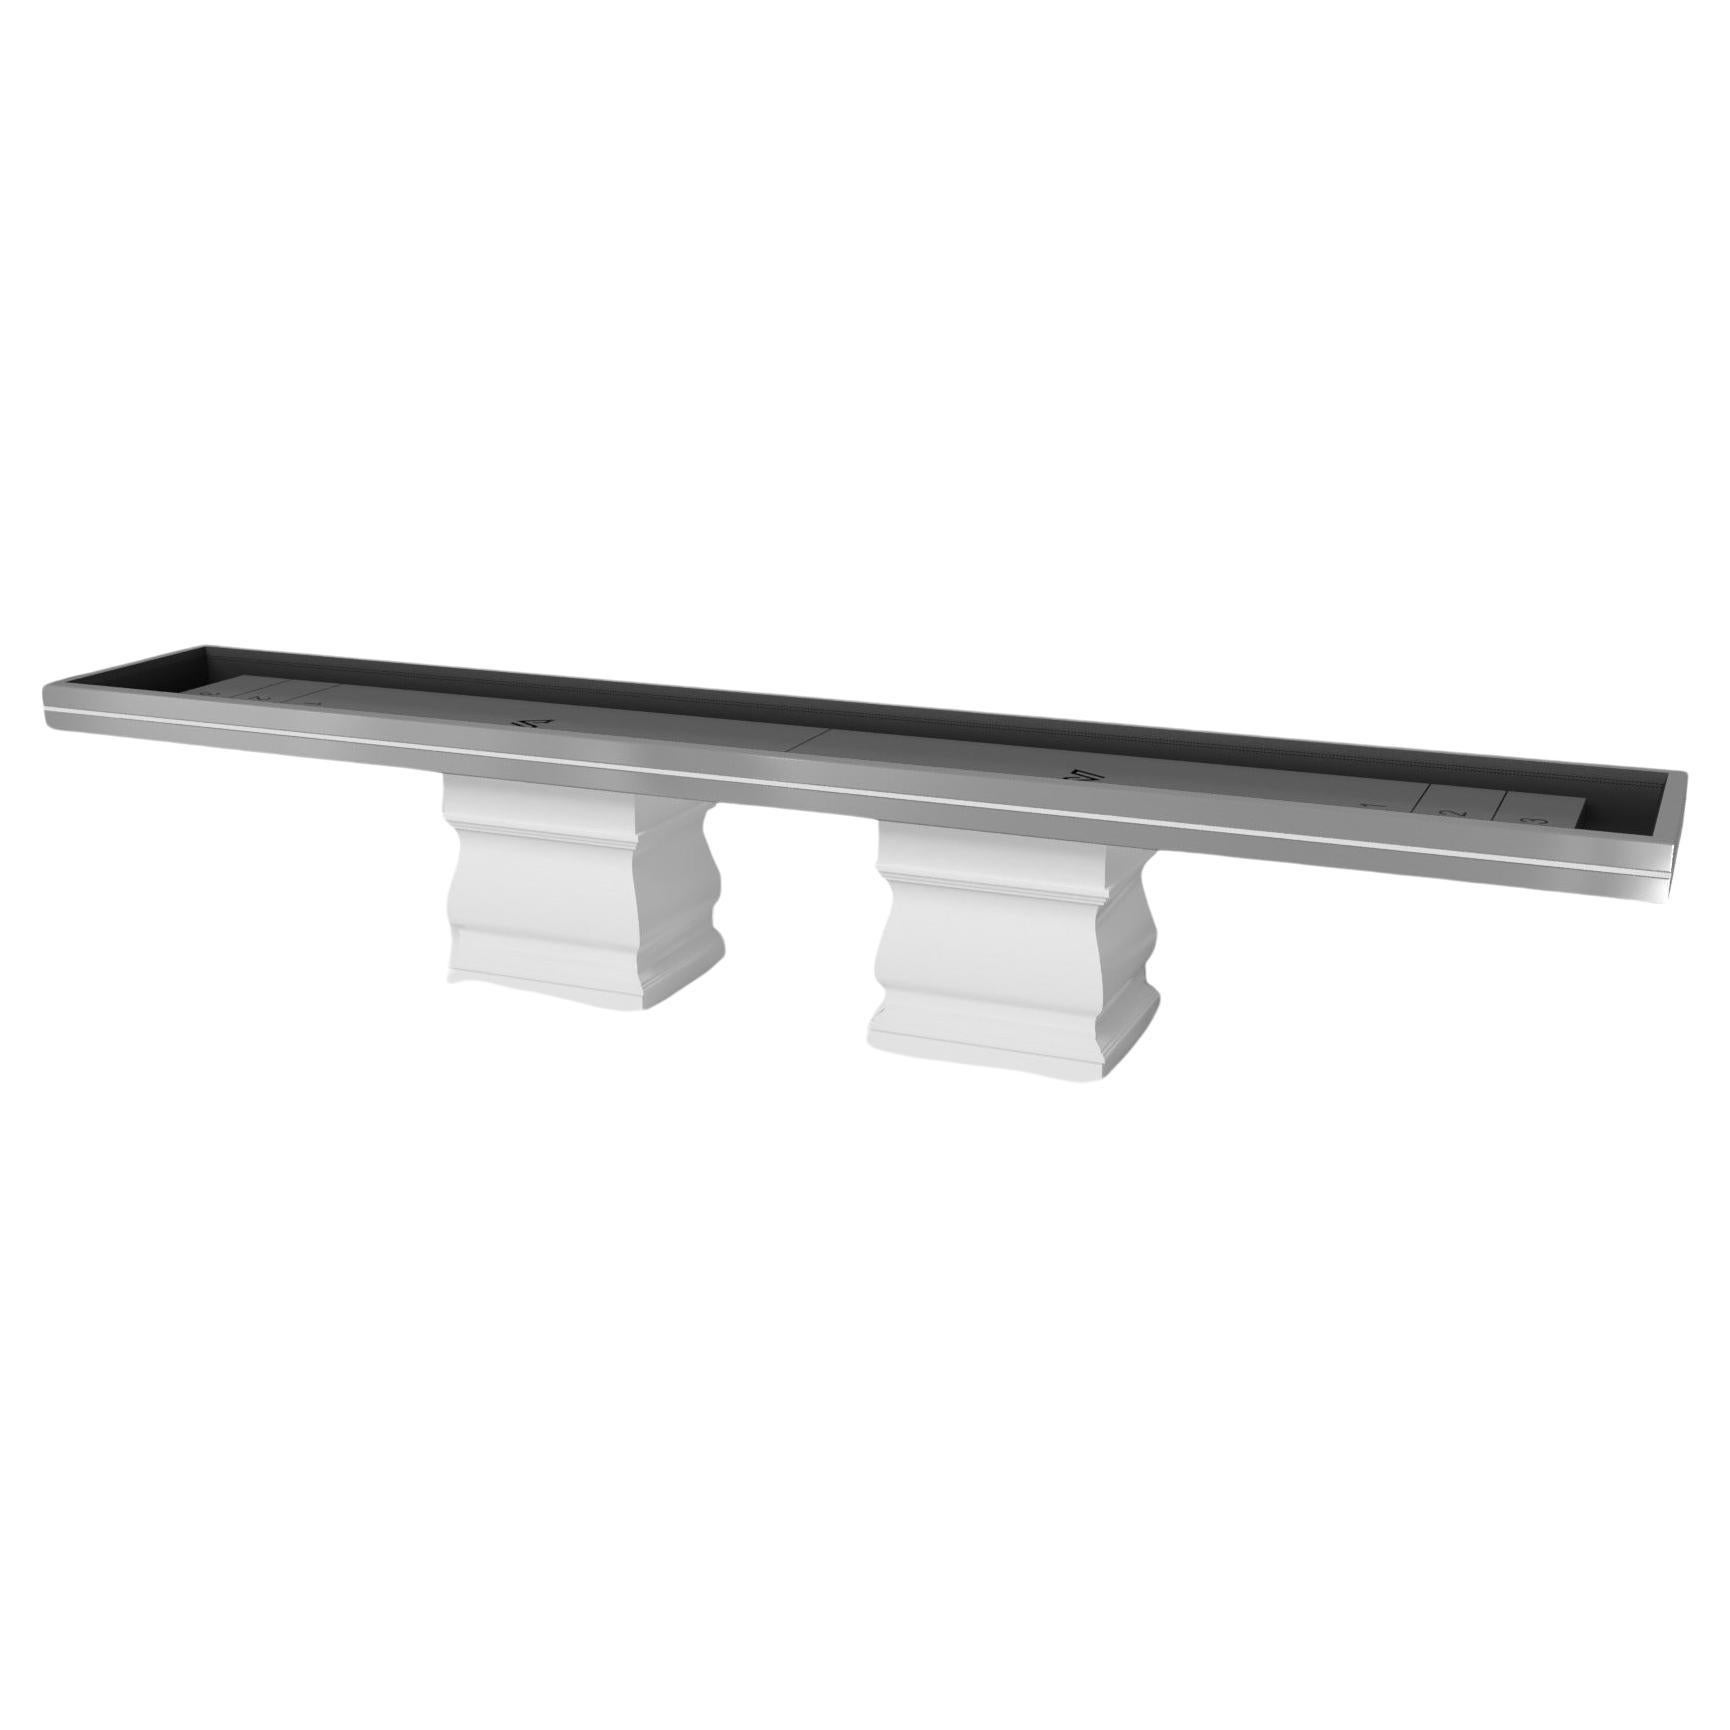 Elevate Customs Baluster Shuffleboard / Stainless Steel Sheet Metal in 9' - USA For Sale